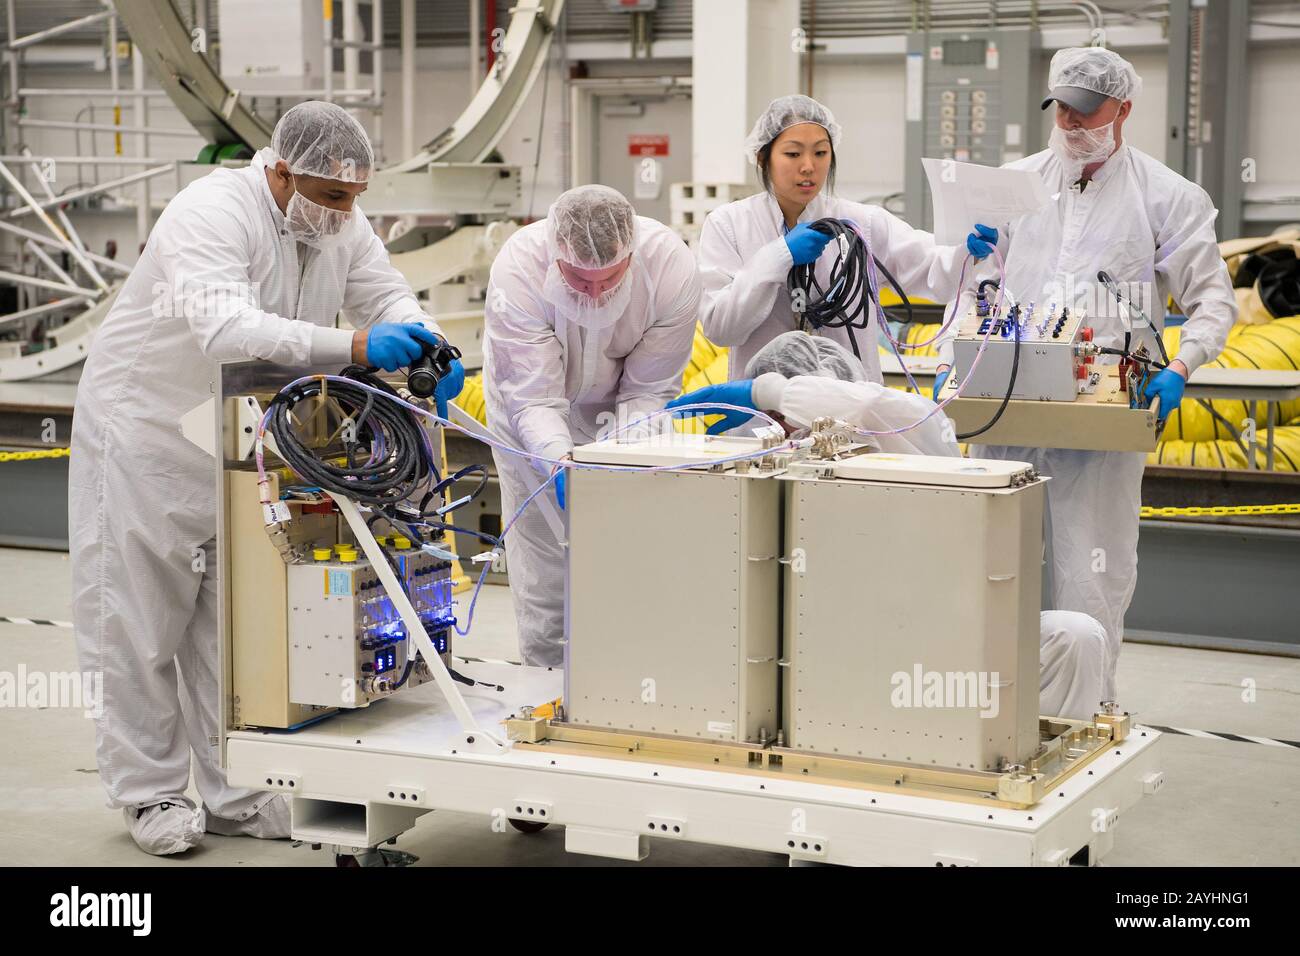 Mission engineers receive and prepare science and research and food items for the final cargo load into the Cygnus resupply spacecraft onboard the Northrop Grumman Antares rocket, on February 8, 2020, at the Horizontal Integration Facility (HIF) of NASA's Wallops Flight Facility in Virginia. Northrop Grumman's 13th contracted cargo resupply mission with NASA to the International Space Station will deliver more than 7,500 pounds of science and research, crew supplies and vehicle hardware to the orbital laboratory and its crew. NASA Photo by Aubrey Gemignani/UPI Stock Photo